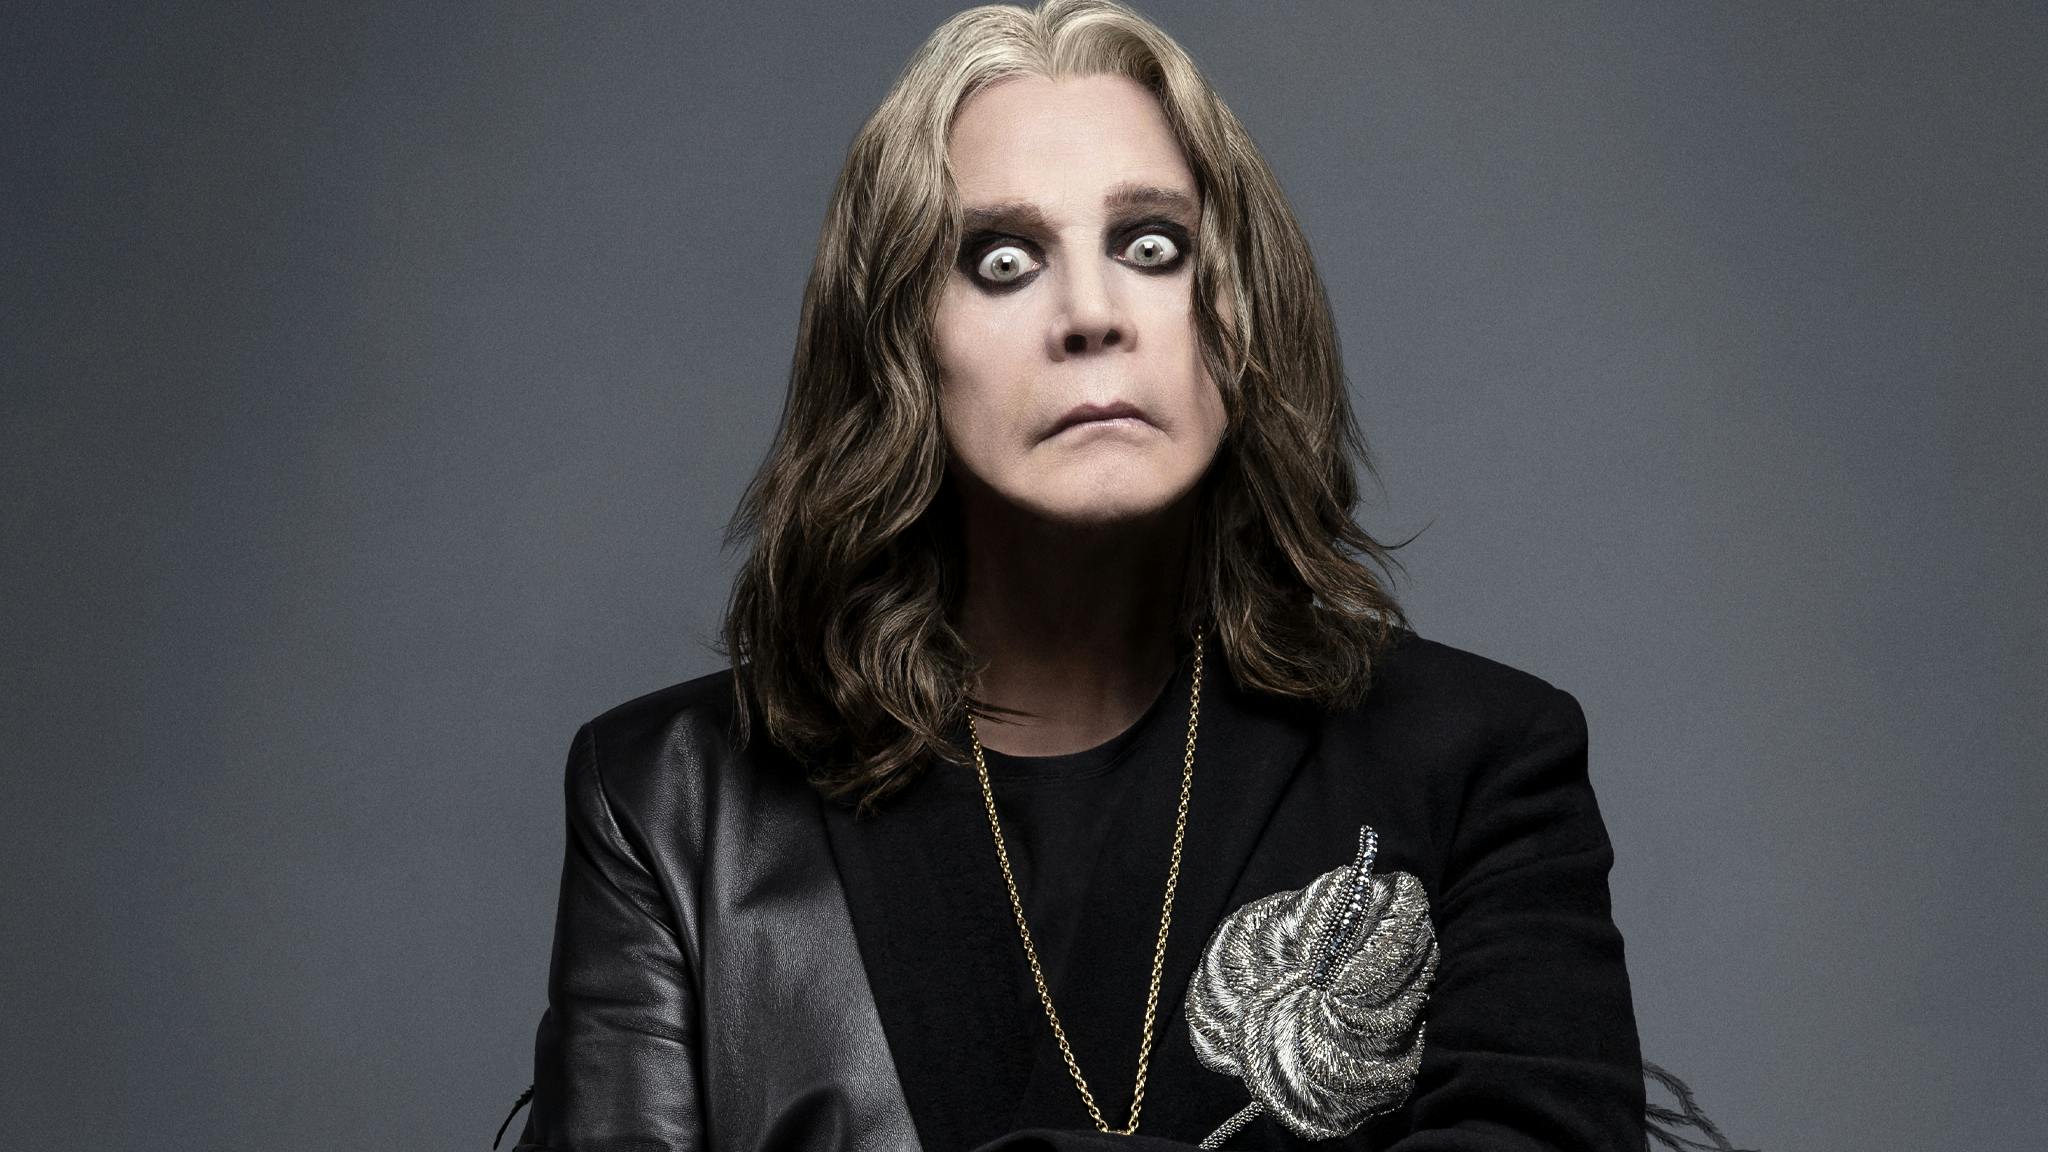 Ozzy Osbourne says he still wants to play live